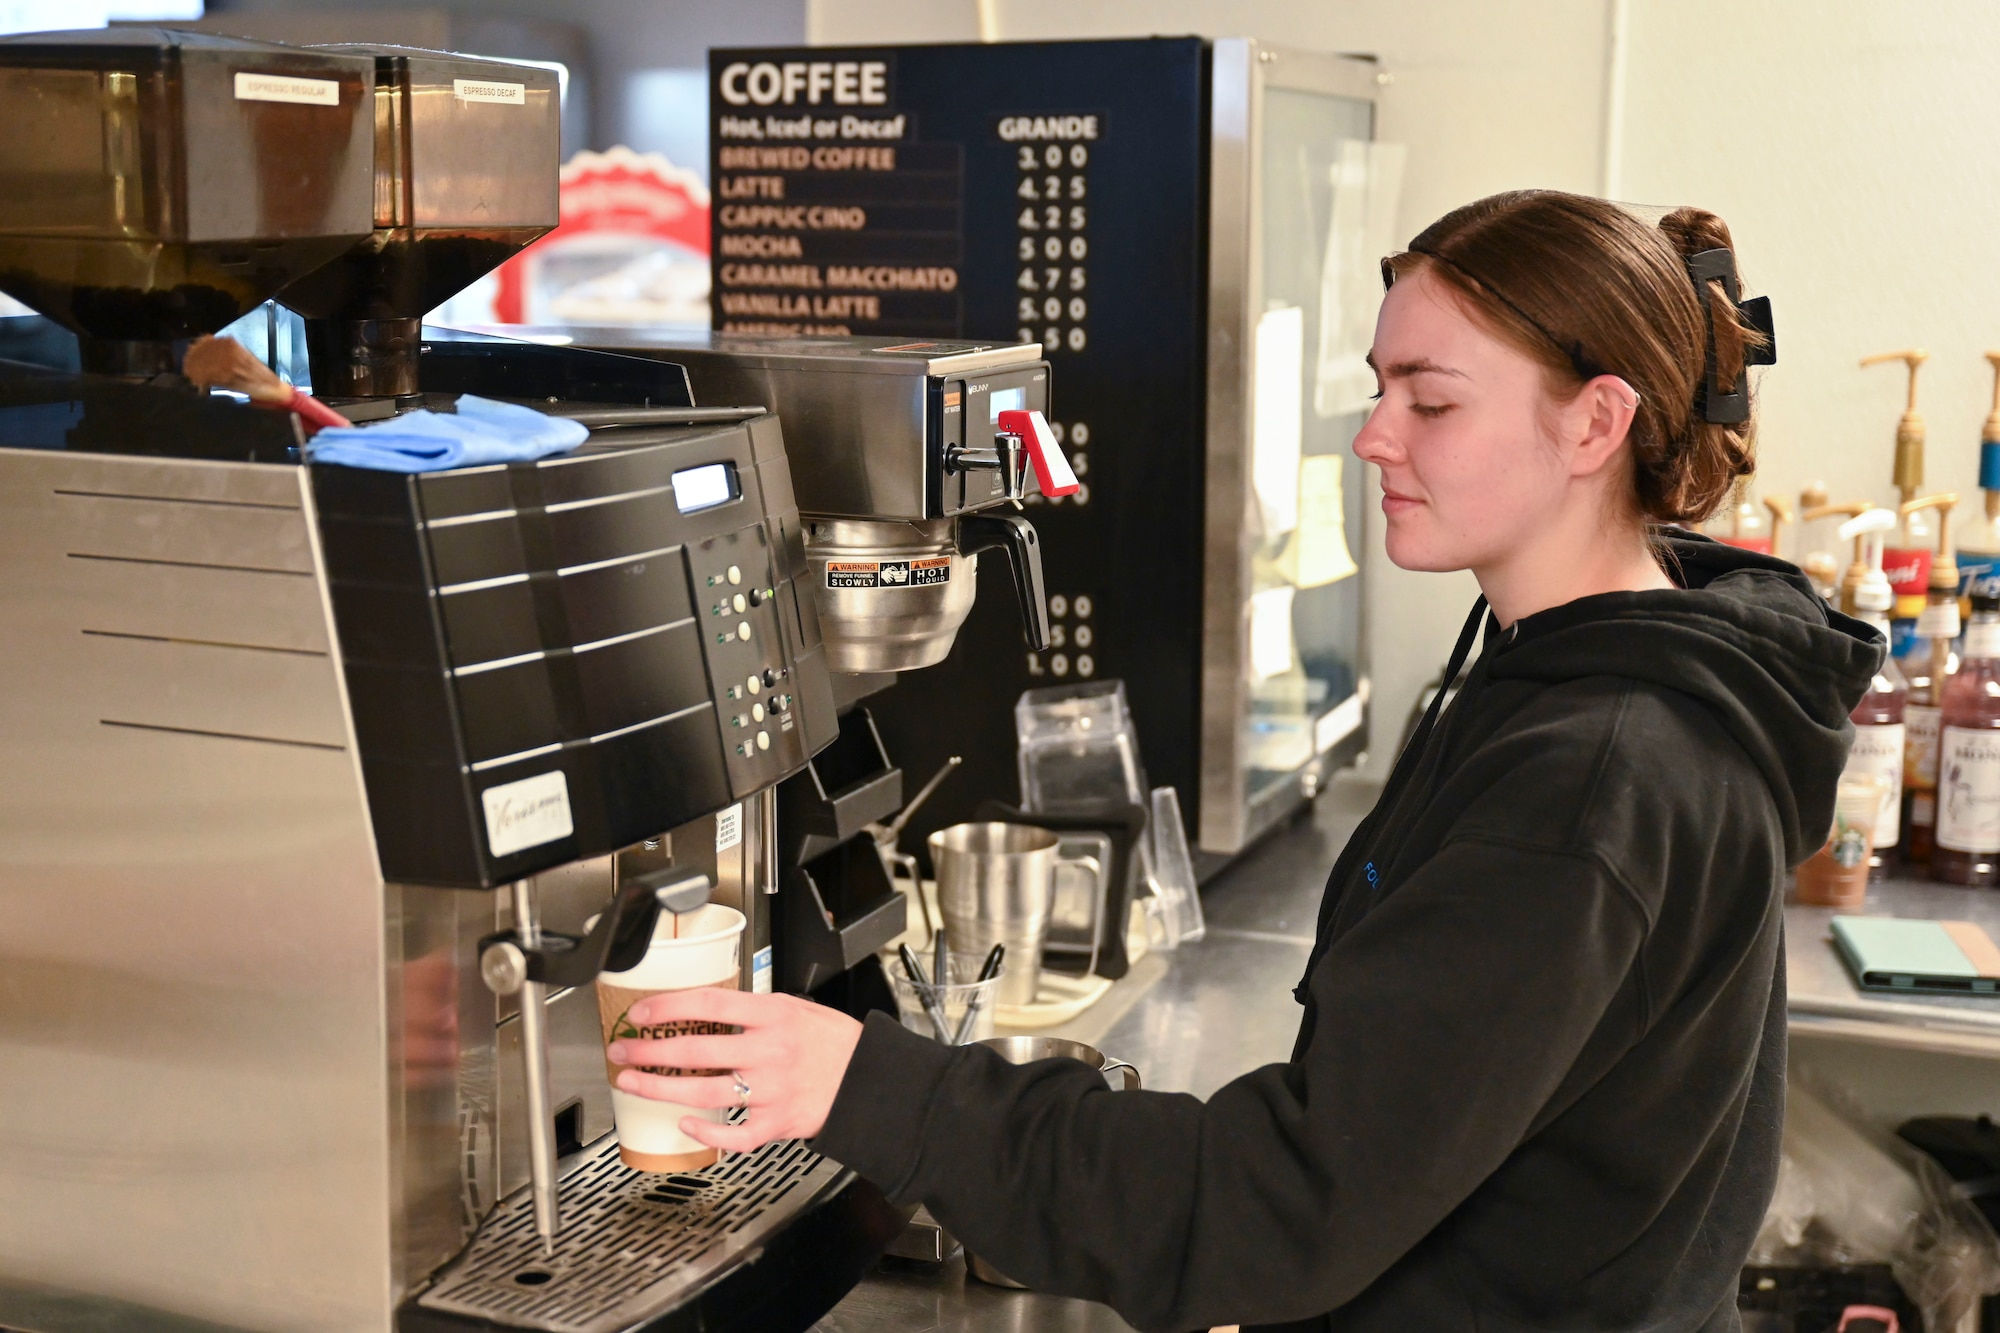 Jennifer Layman, 49th Force Support Squadron barista, prepares a coffee drink with espresso in the 49er Cafe at Holloman Air Force Base, New Mexico, March 21, 2024. The 49er Cafe unveiled a new menu recently featuring brewed awakenings and a selection of coffee drinks. (U.S. Air Force photo by Airman 1st Class Michelle Ferrari)